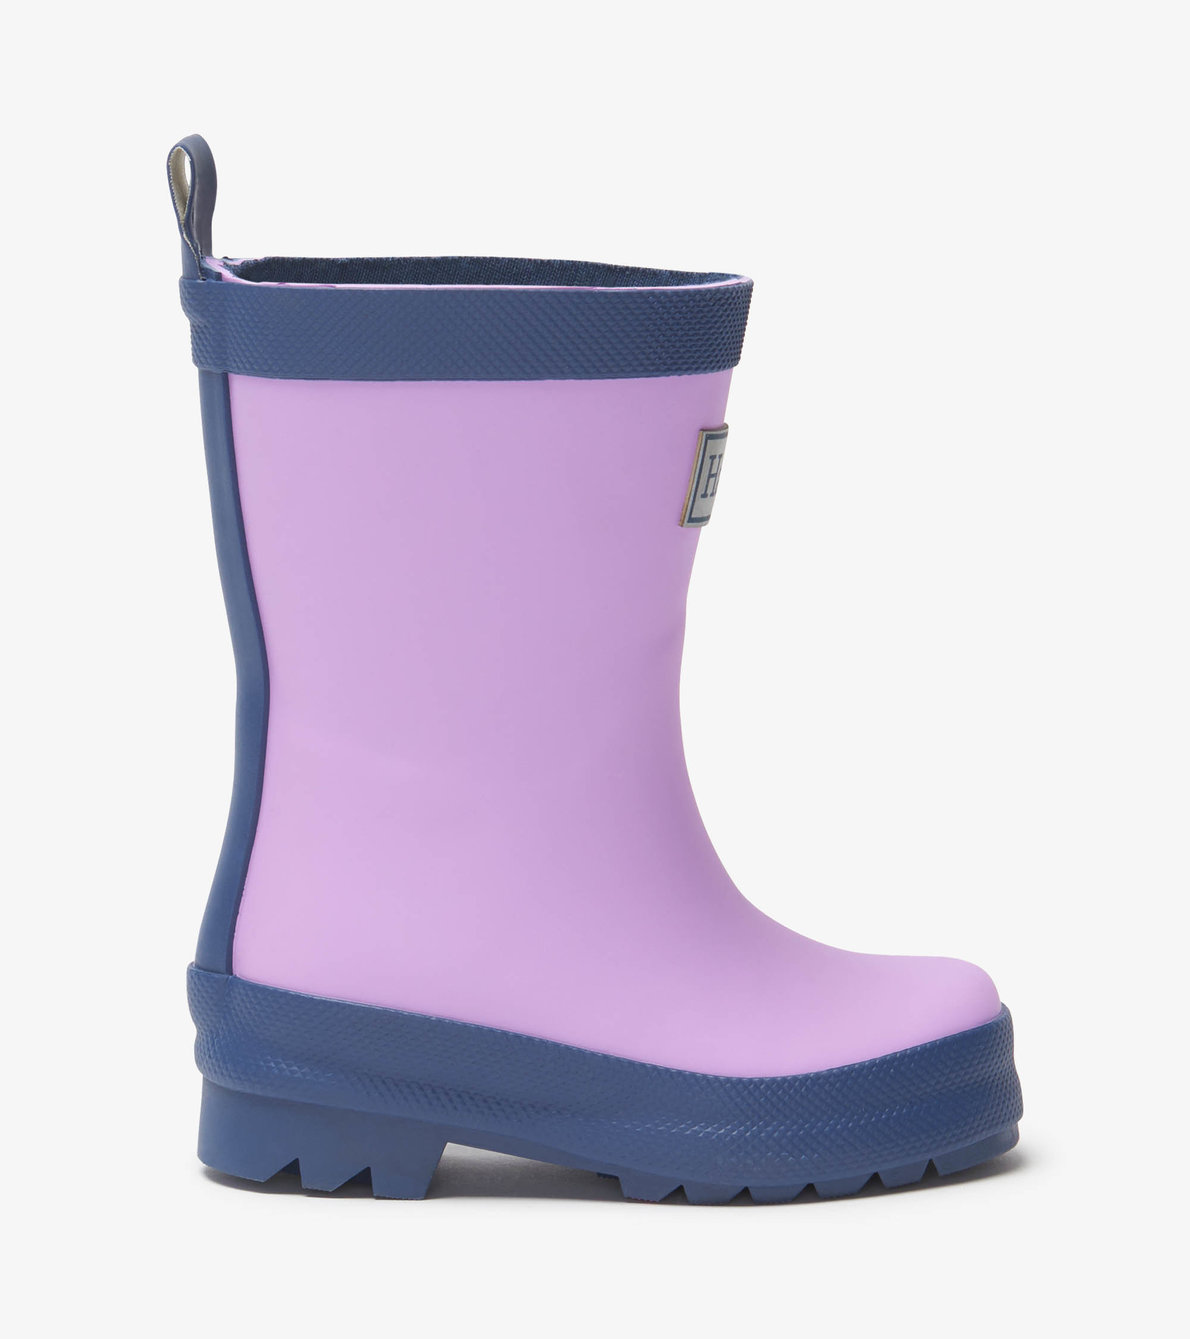 View larger image of My 1st Rain Boots - Lilac